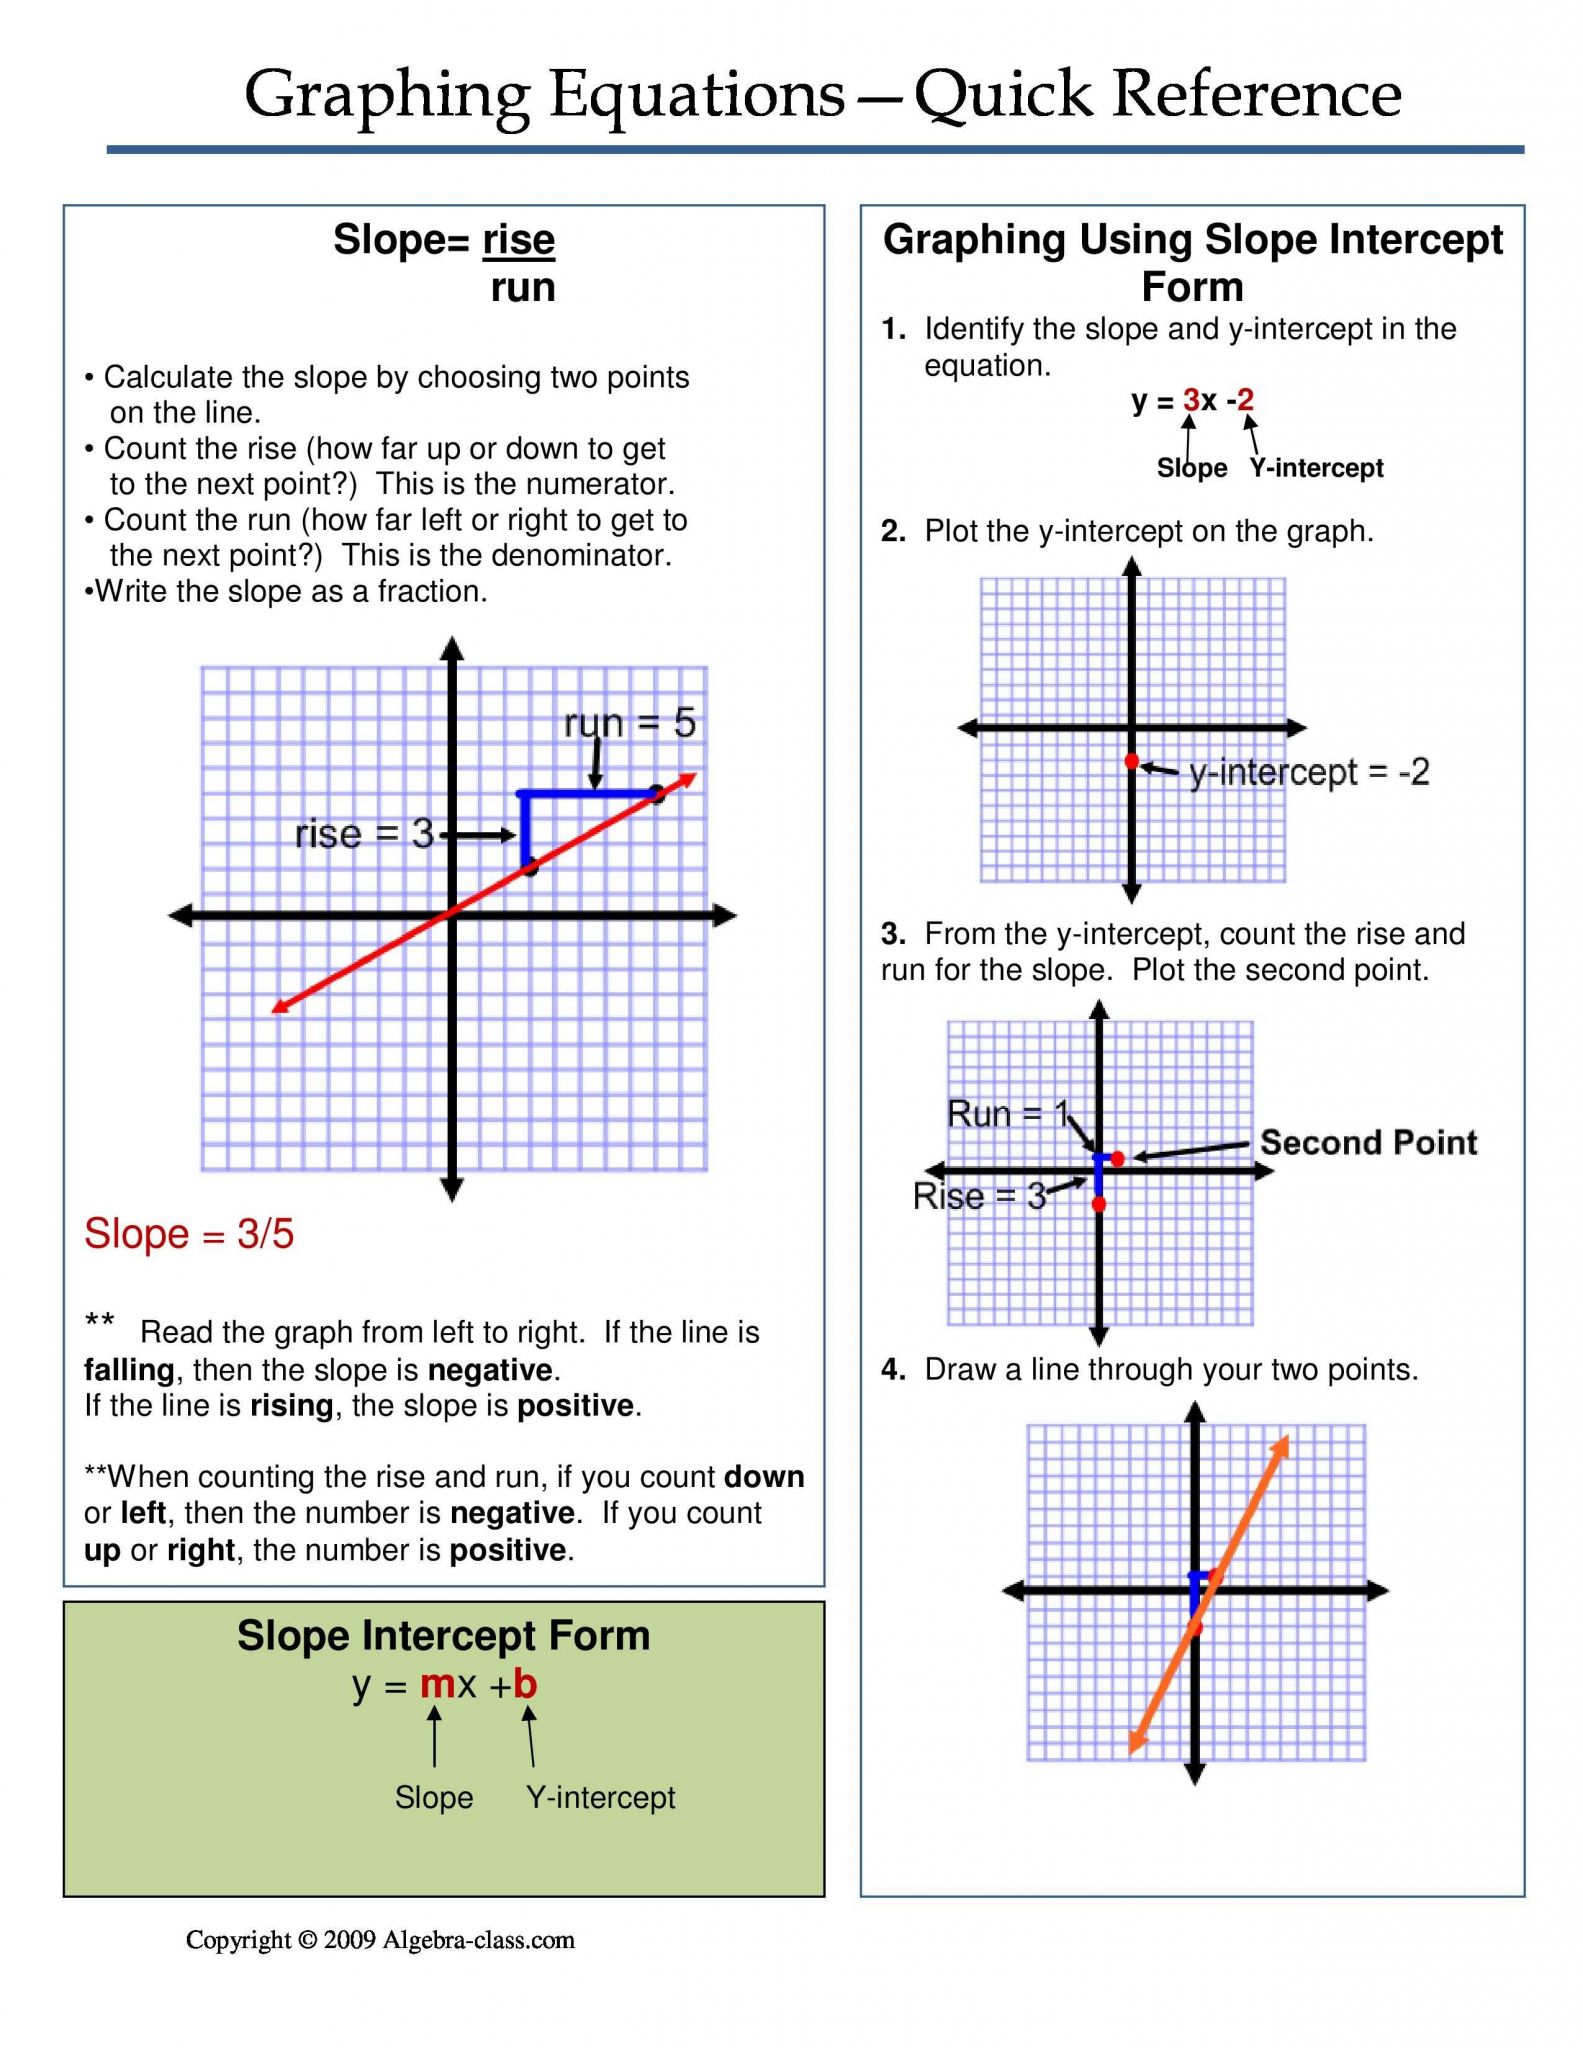 Algebra 2 Factoring Worksheet as Well as E Page Notes Worksheet for the Graphing Equations Unit